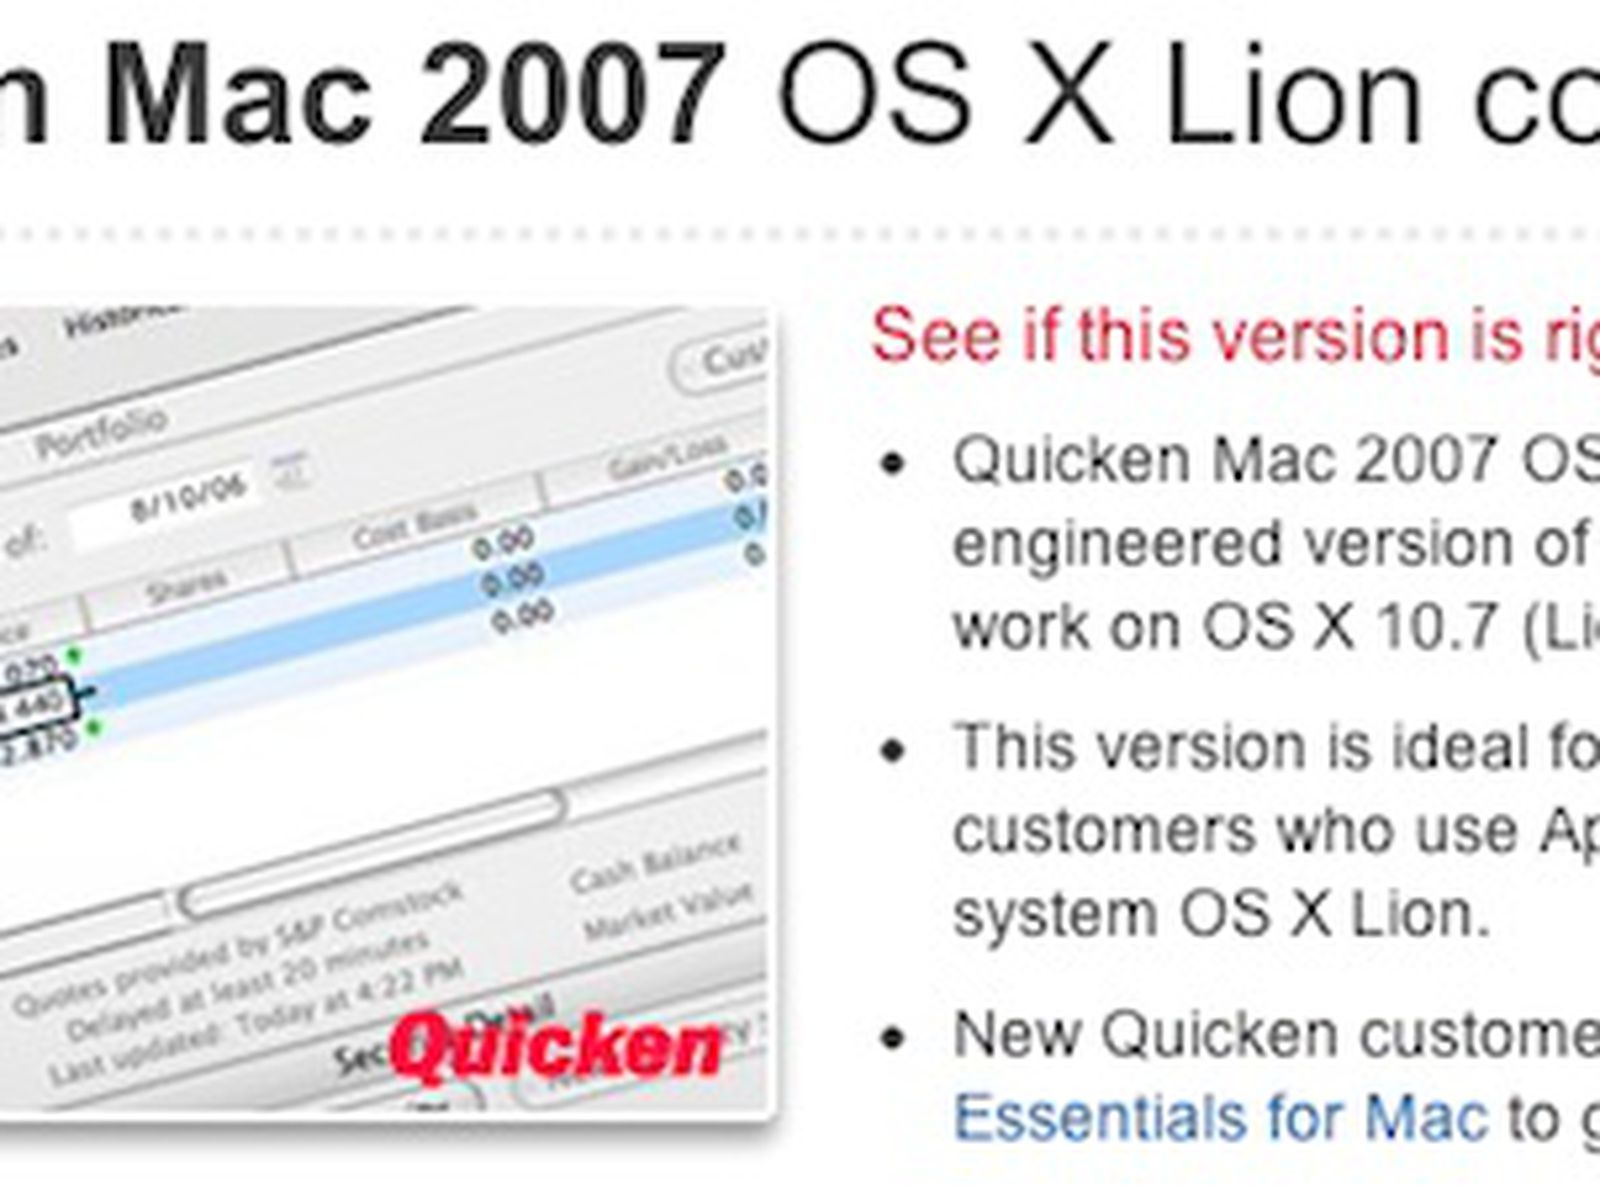 do reports on quicken for mac